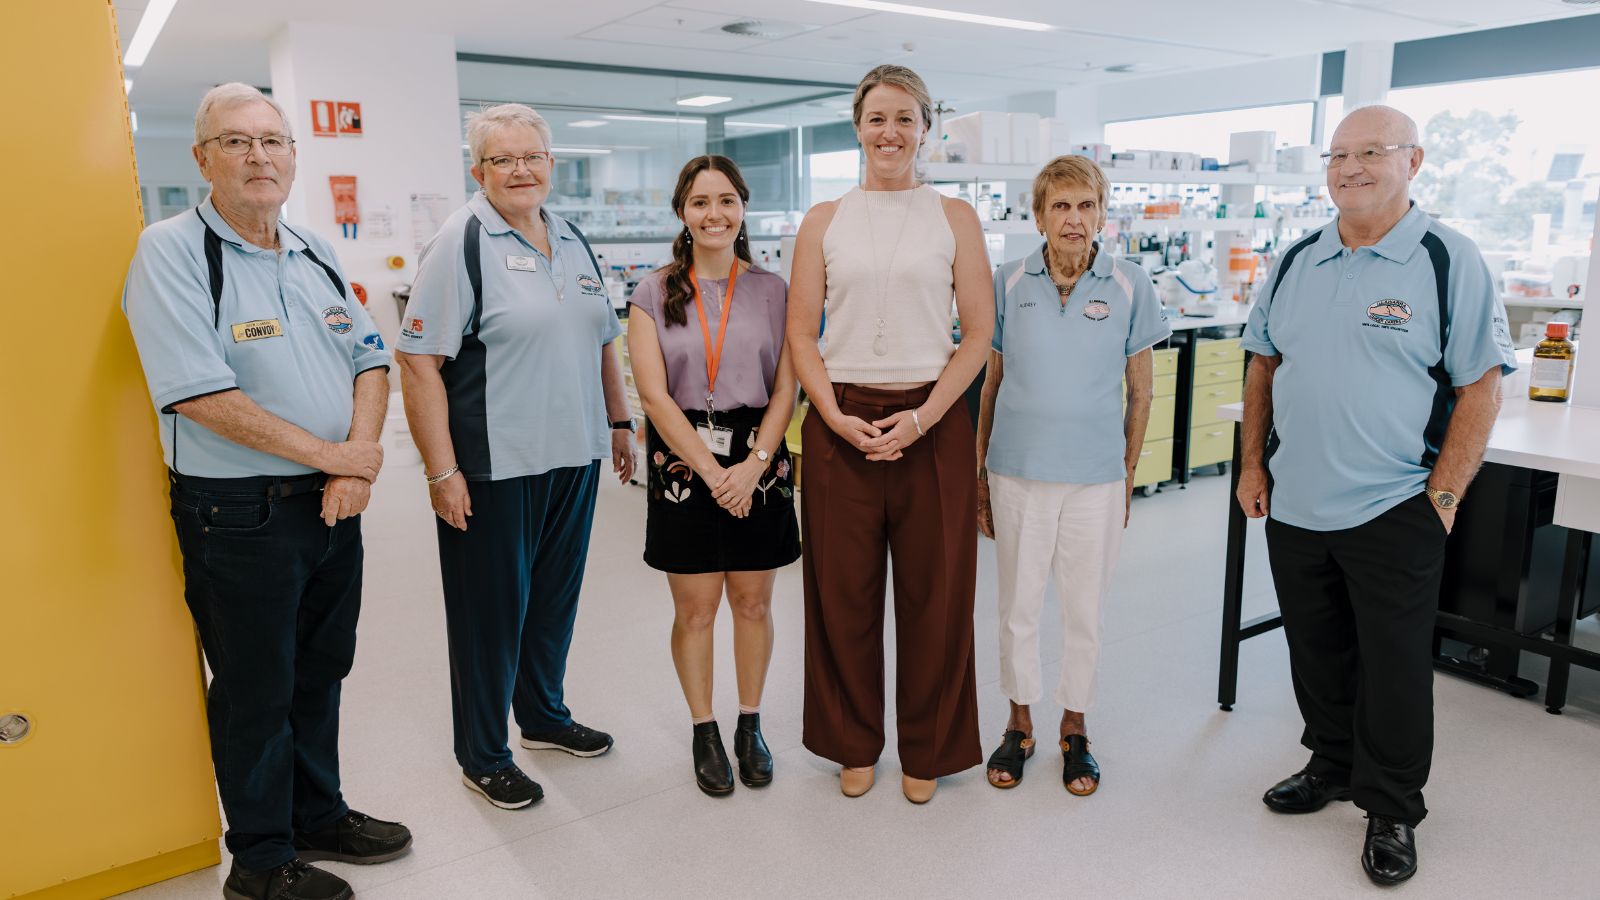 Representatives of the Illawarra Cancer Carers with UOW Molecular Horizons research assistant Chelsea Penney and Associate Professor Katrina Green. Photo: Michael Gray